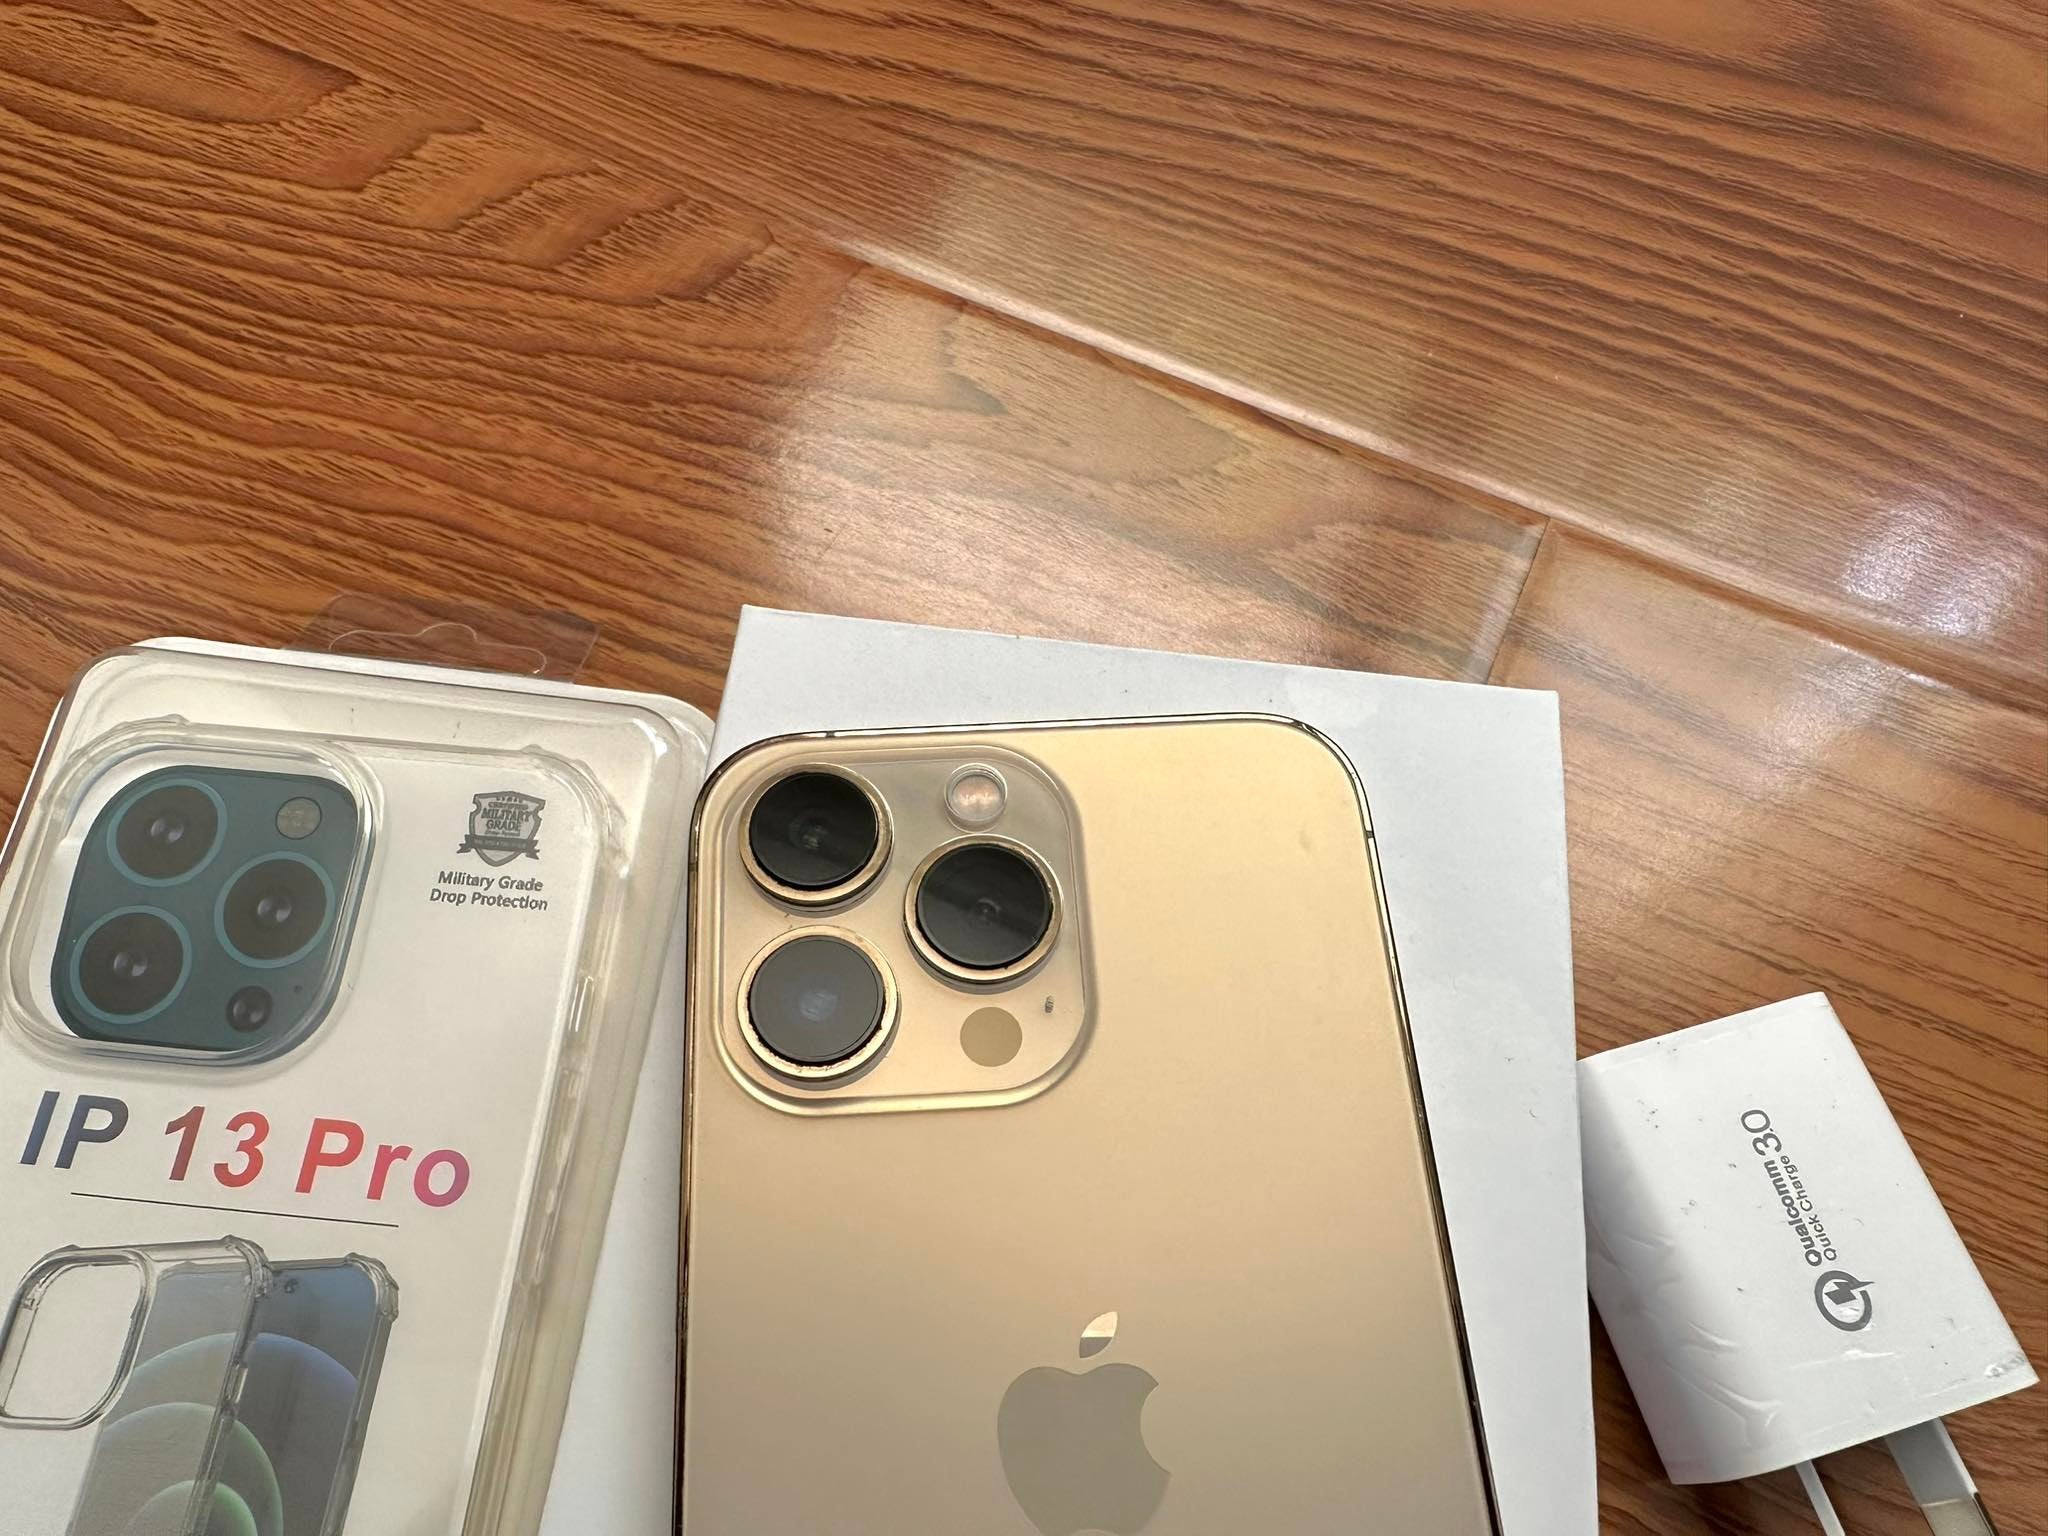 refurbished iphone,iphone with afterpay,second hand iphone 12 pro